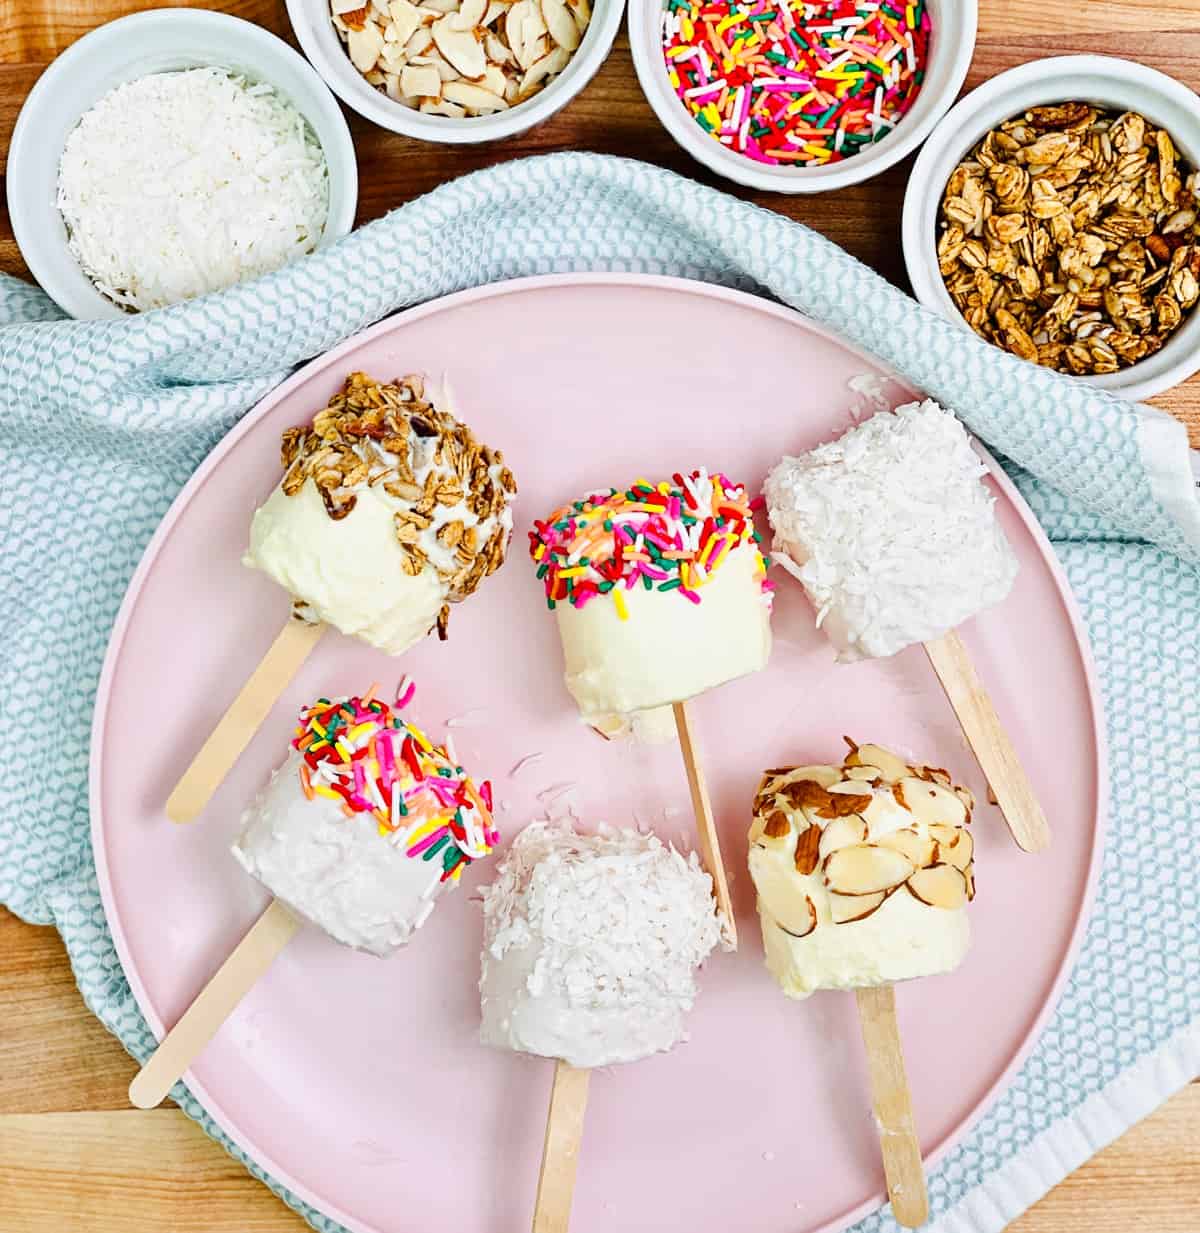 This Frozen Yogurt Popsicle Hack Is A Great Summer Snack For Kids